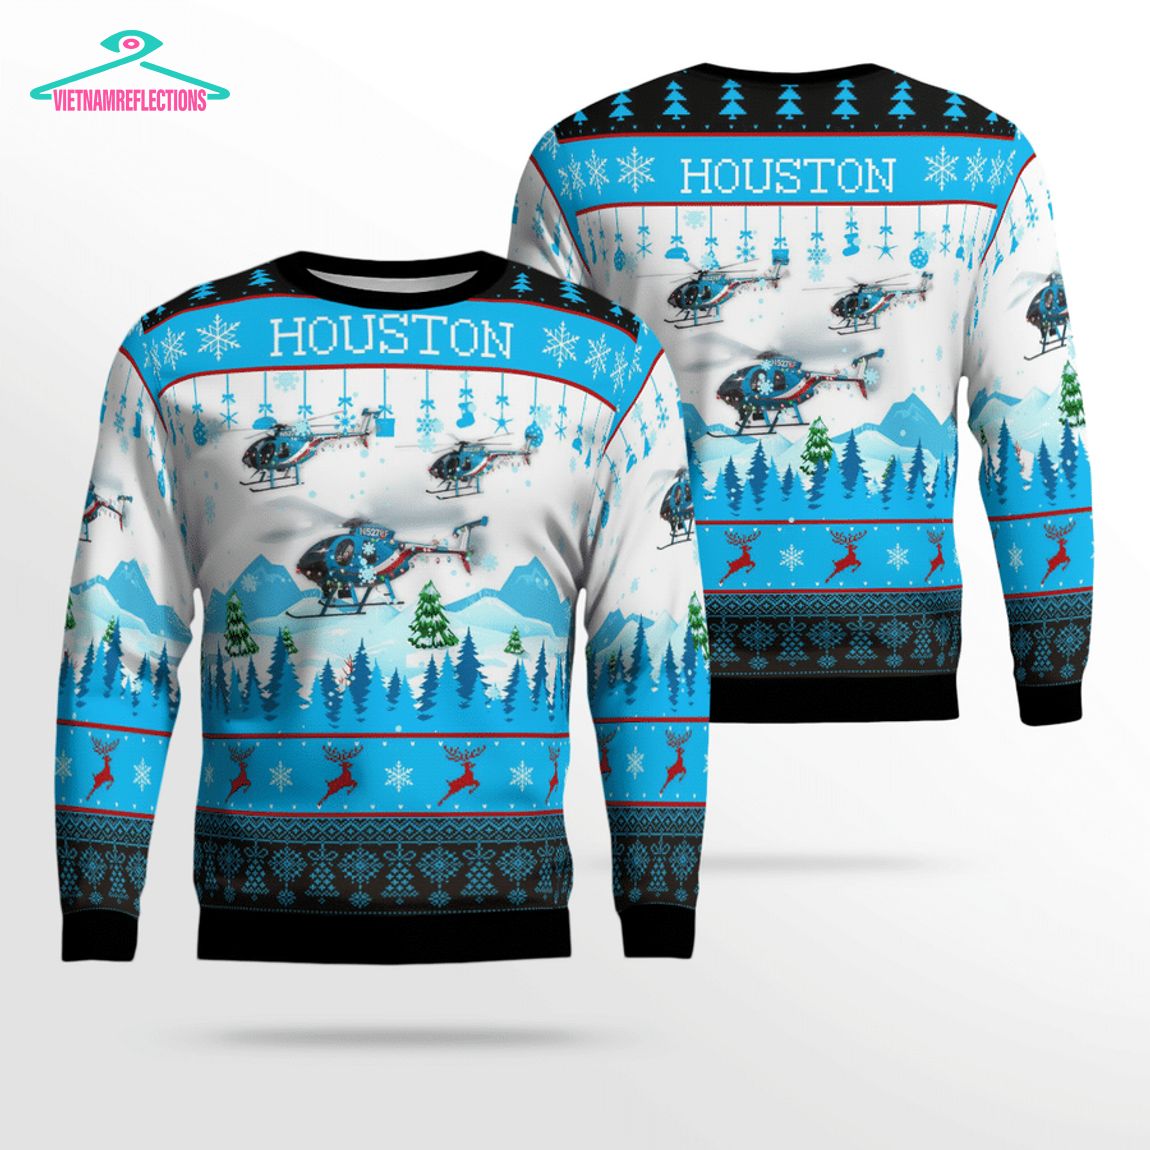 Houston Police Helicopter 78F N5278F 3D Christmas Sweater